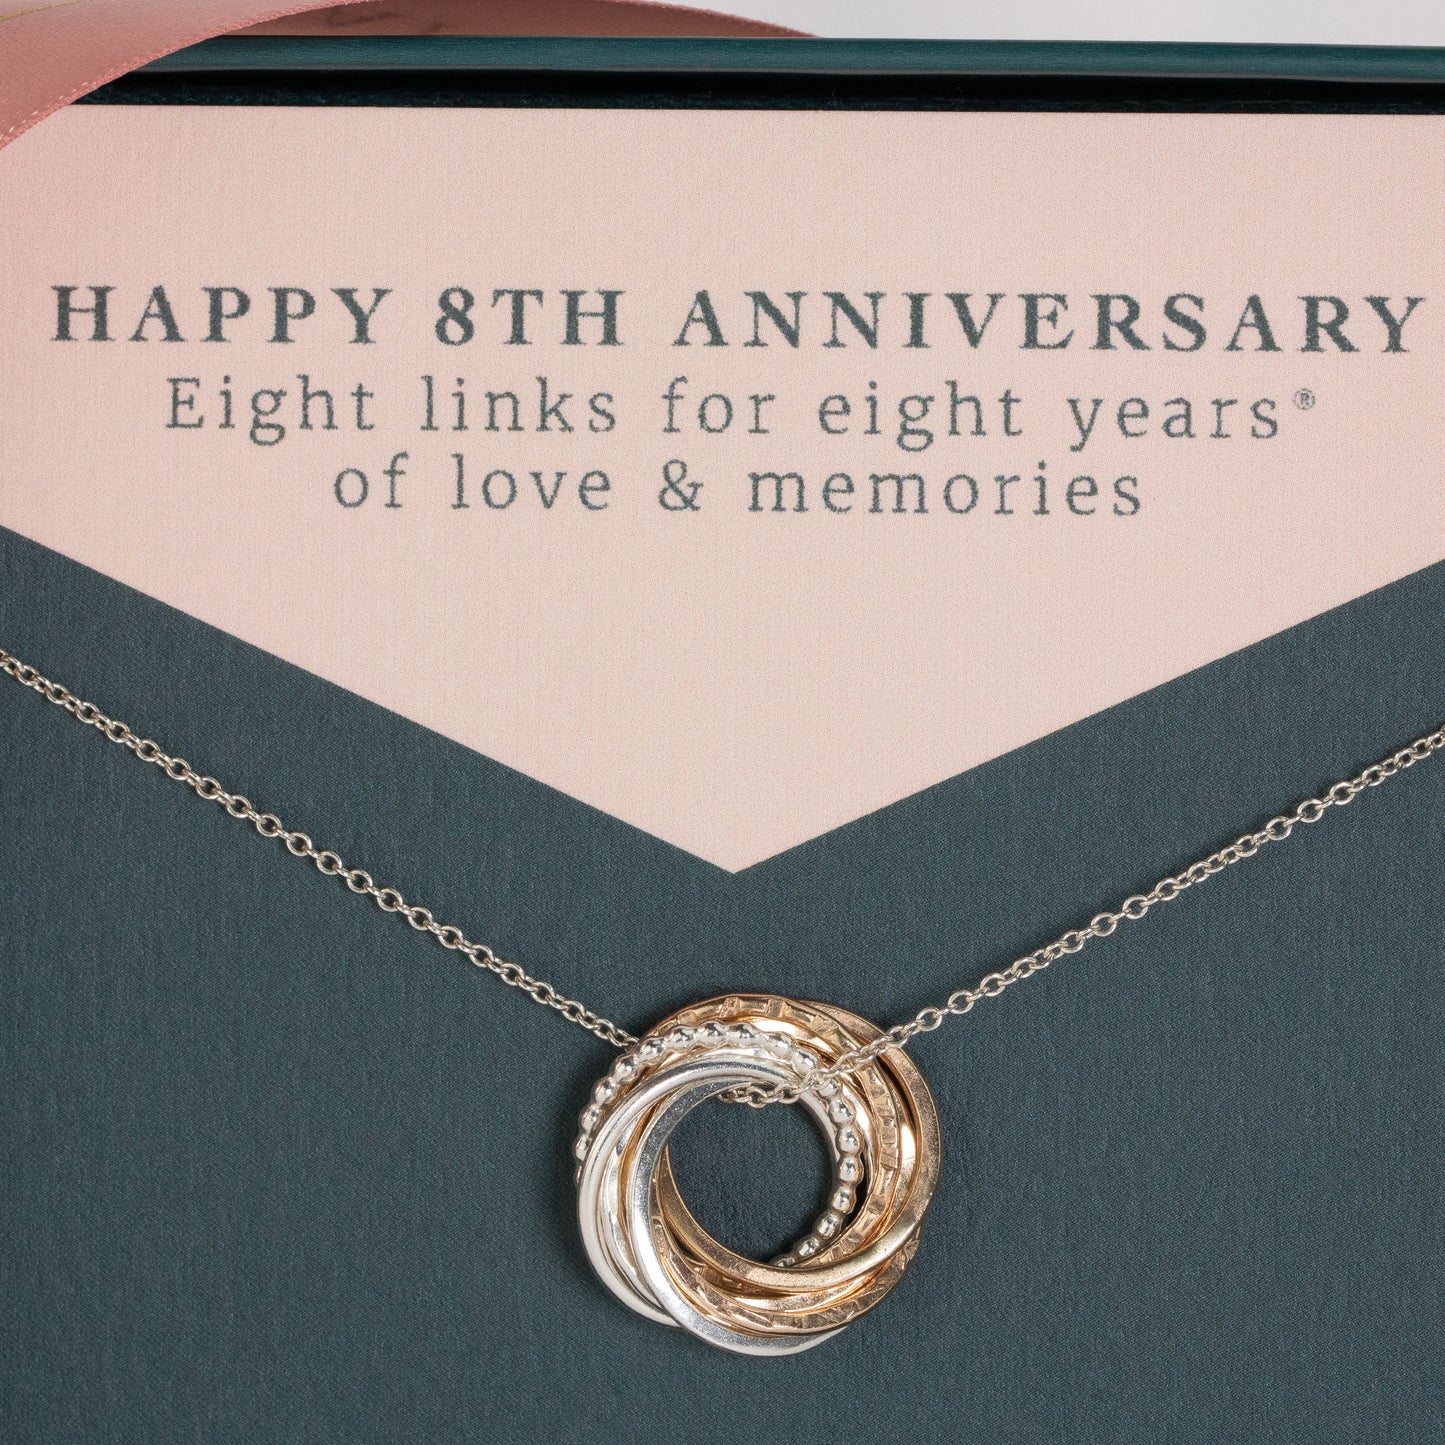 8th Anniversary Necklace - The Original 8 Rings for 8 Years Necklace - Silver & Gold